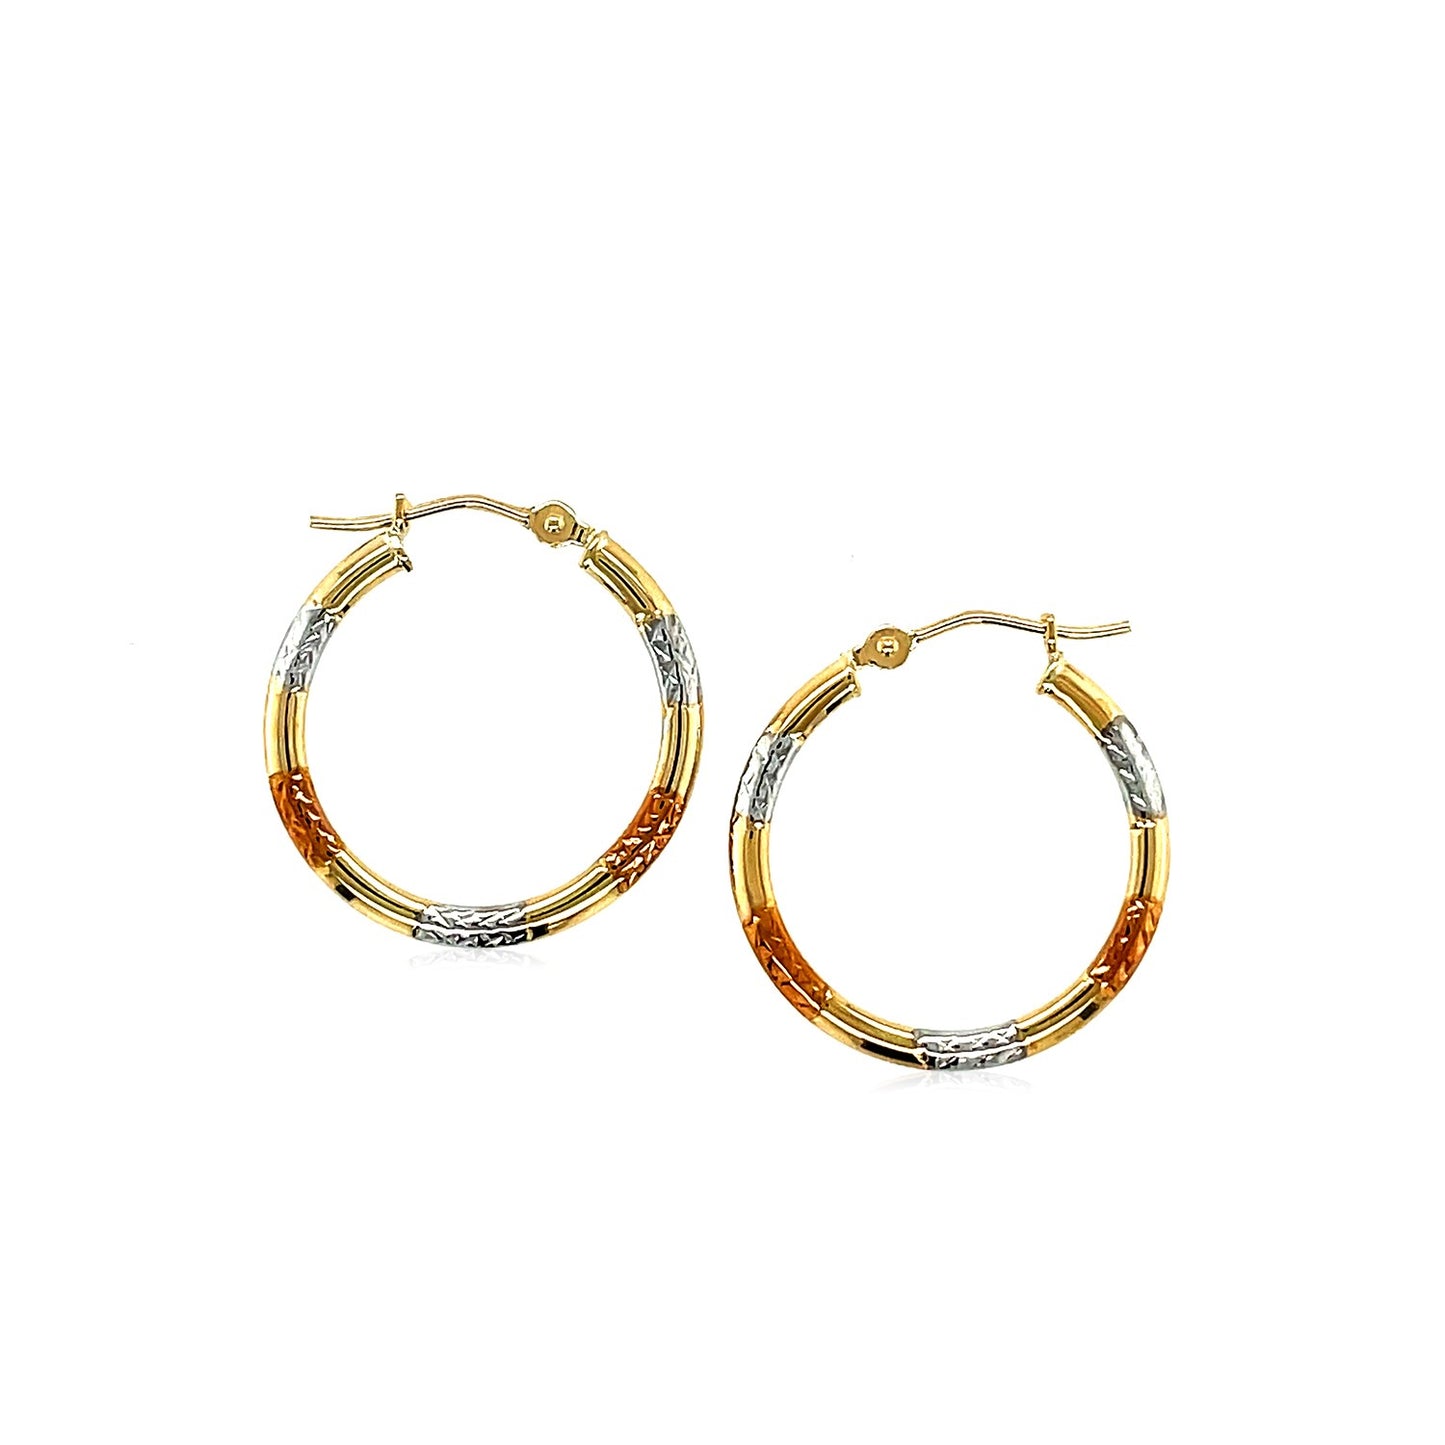 10k Tri-Color Gold Classic Hoop Earrings with Diamond Cut Details(20mm)